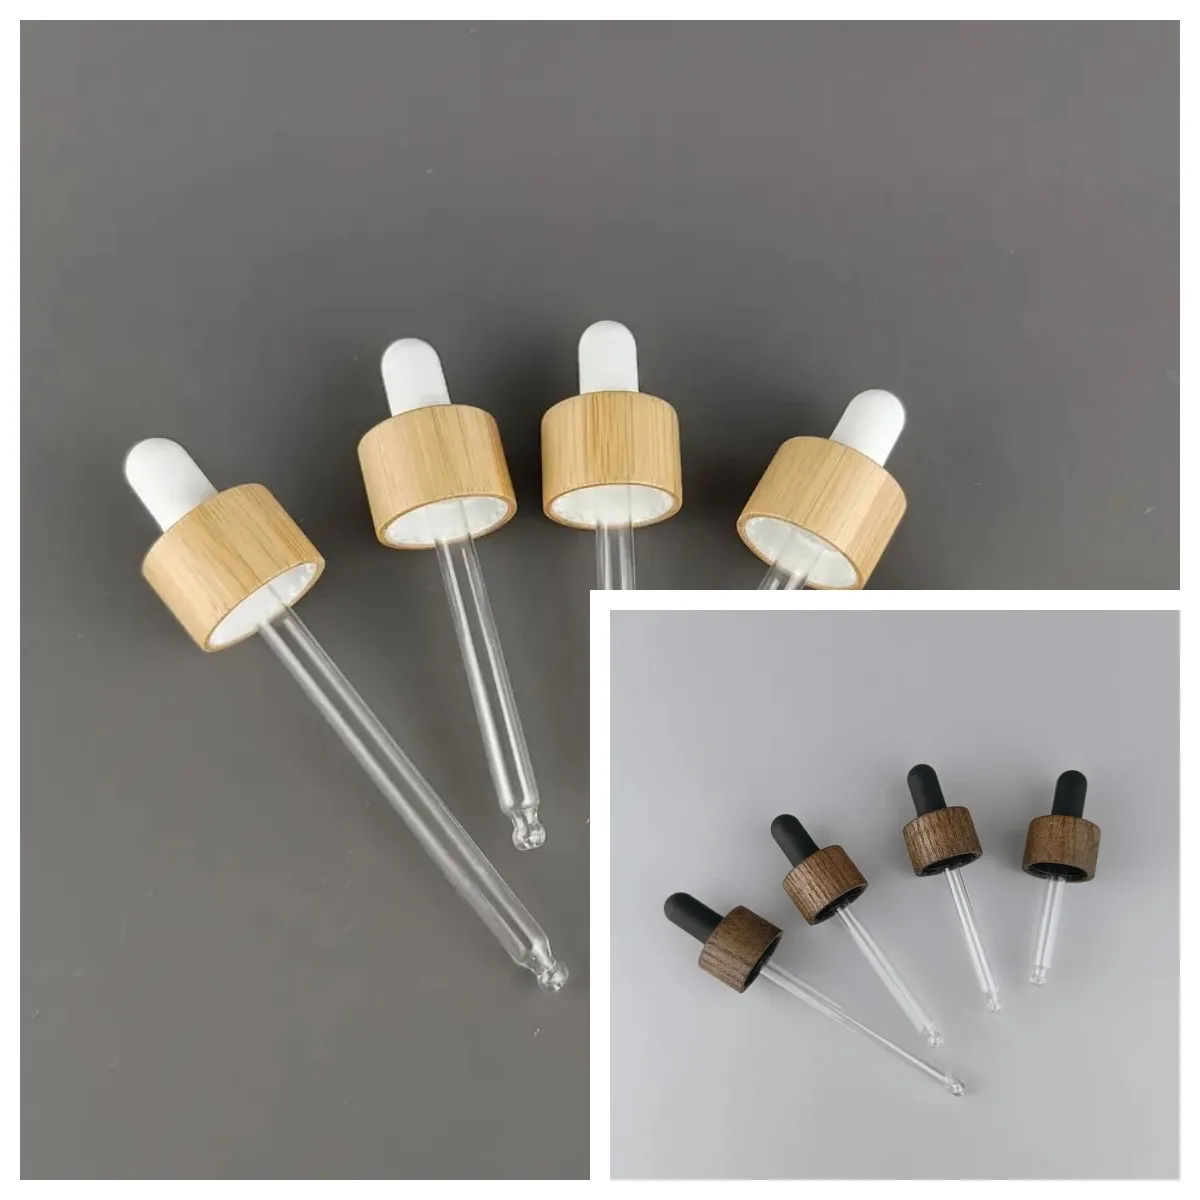 

100Pcs Eco-friendly Bamboo Essential Oil Bottle Top Dropper Pipette Cap 18/410 20/410 Common Standard Sizes Engraving Support